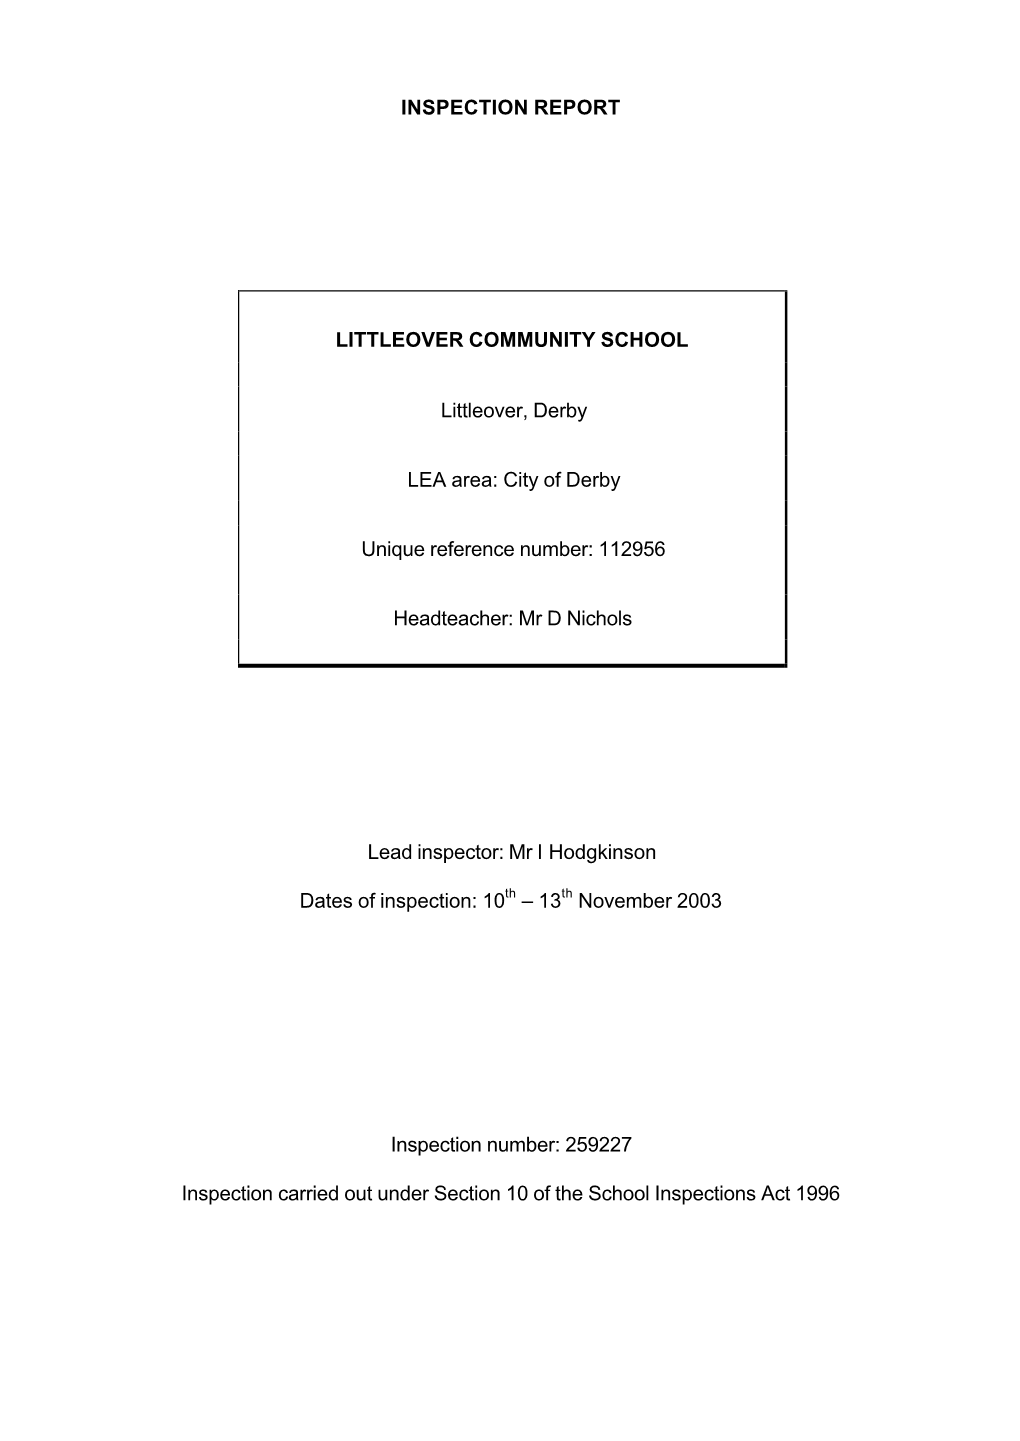 INSPECTION REPORT LITTLEOVER COMMUNITY SCHOOL Littleover, Derby LEA Area: City of Derby Unique Reference Number: 112956 Headteac